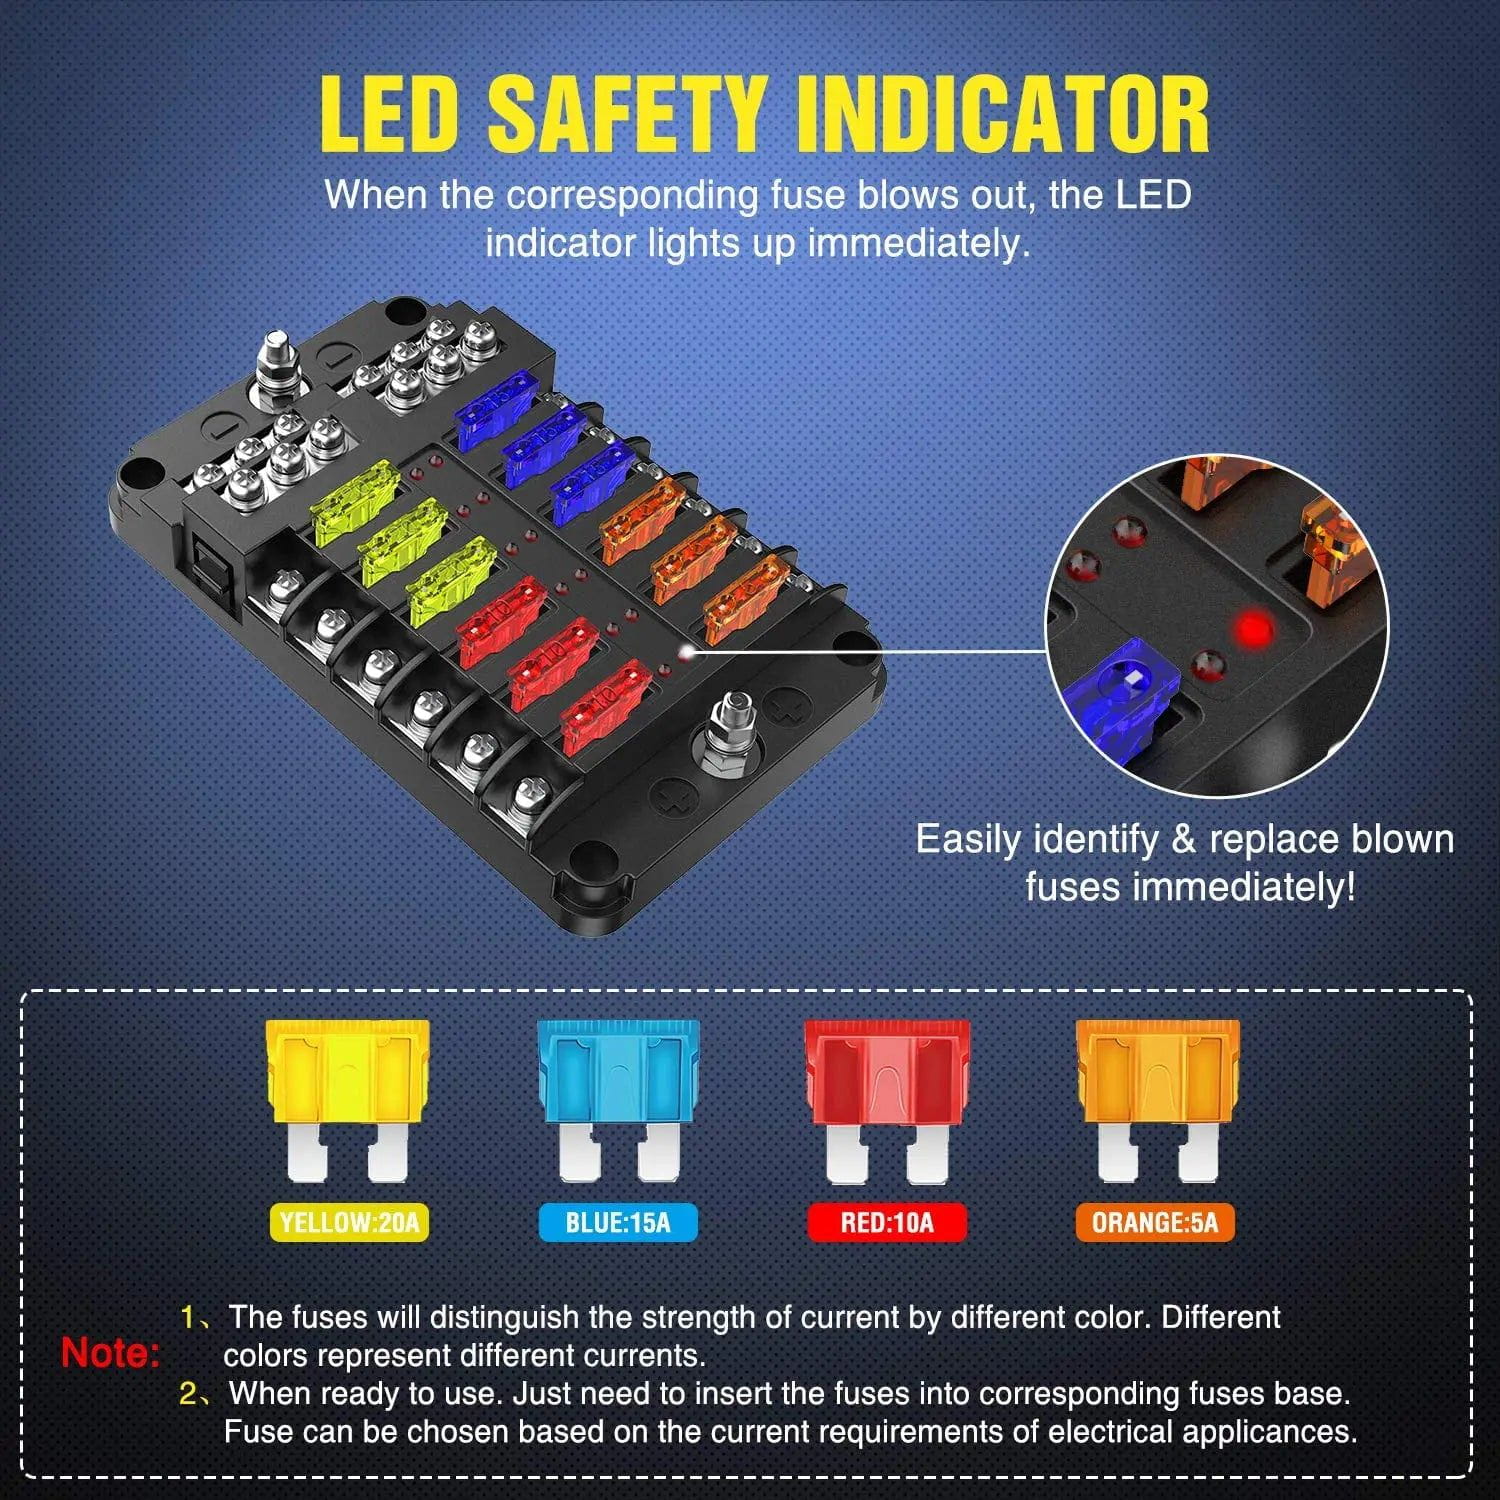 fuse 12 Way Blade Fuse Block 12 Circuits with Negative Bus Fuse Box Holder & LED Indicator ATO/ATC Fuse Panel Waterproof Cover